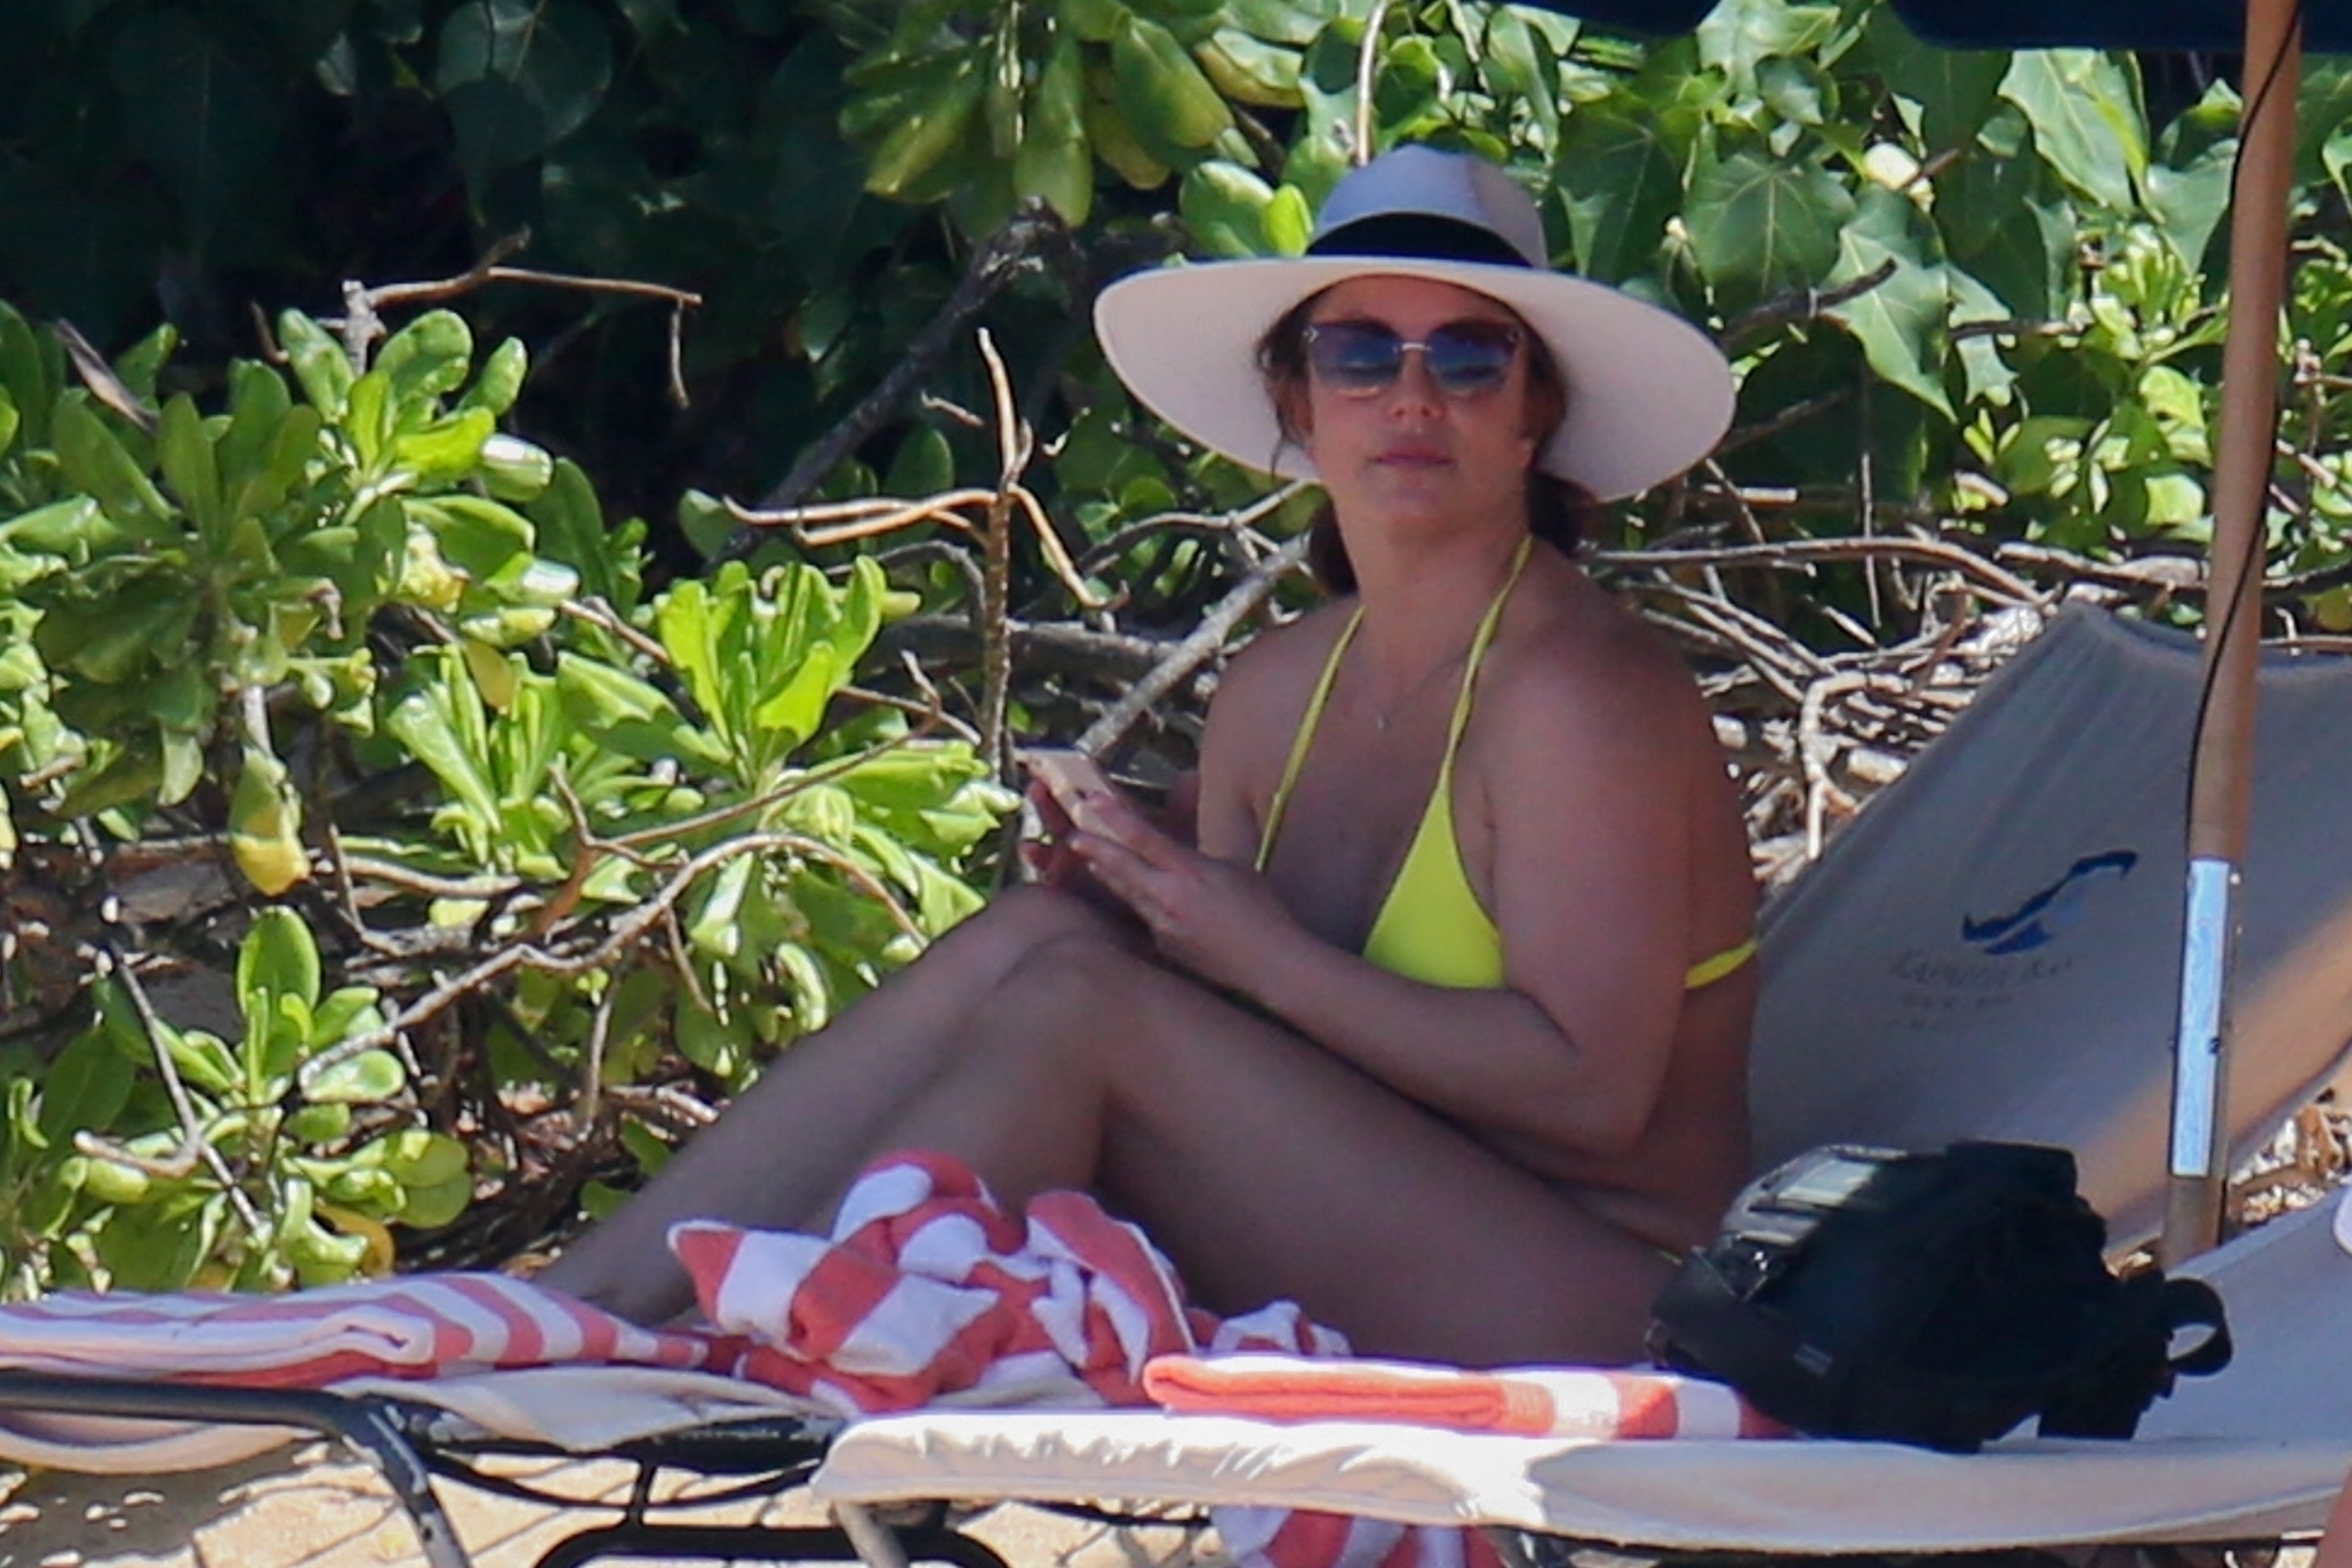 Honolulu, HI  - *PREMIUM-EXCLUSIVE* **WEB EMBARGO UNTIL 2 pm EST on September 12, 2019**  Britney Spears rocks a itty bitty yellow bikini at the beach in Hawaii. The singer looks to be enjoying some downtime after recently getting a new conservator after her father stepped down due to 'health reasons. The singer has maintained a very low profile recently as her father stepped down as her conservator after Britney’s ex Kevin Federline accused him of abuse against their son. *Shot on 09/10/19*

BACKGRID USA 12 SEPTEMBER 2019,Image: 470456779, License: Rights-managed, Restrictions: Code Cory Labore 20%, Model Release: no, Credit line: BACKGRID / Backgrid USA / Profimedia